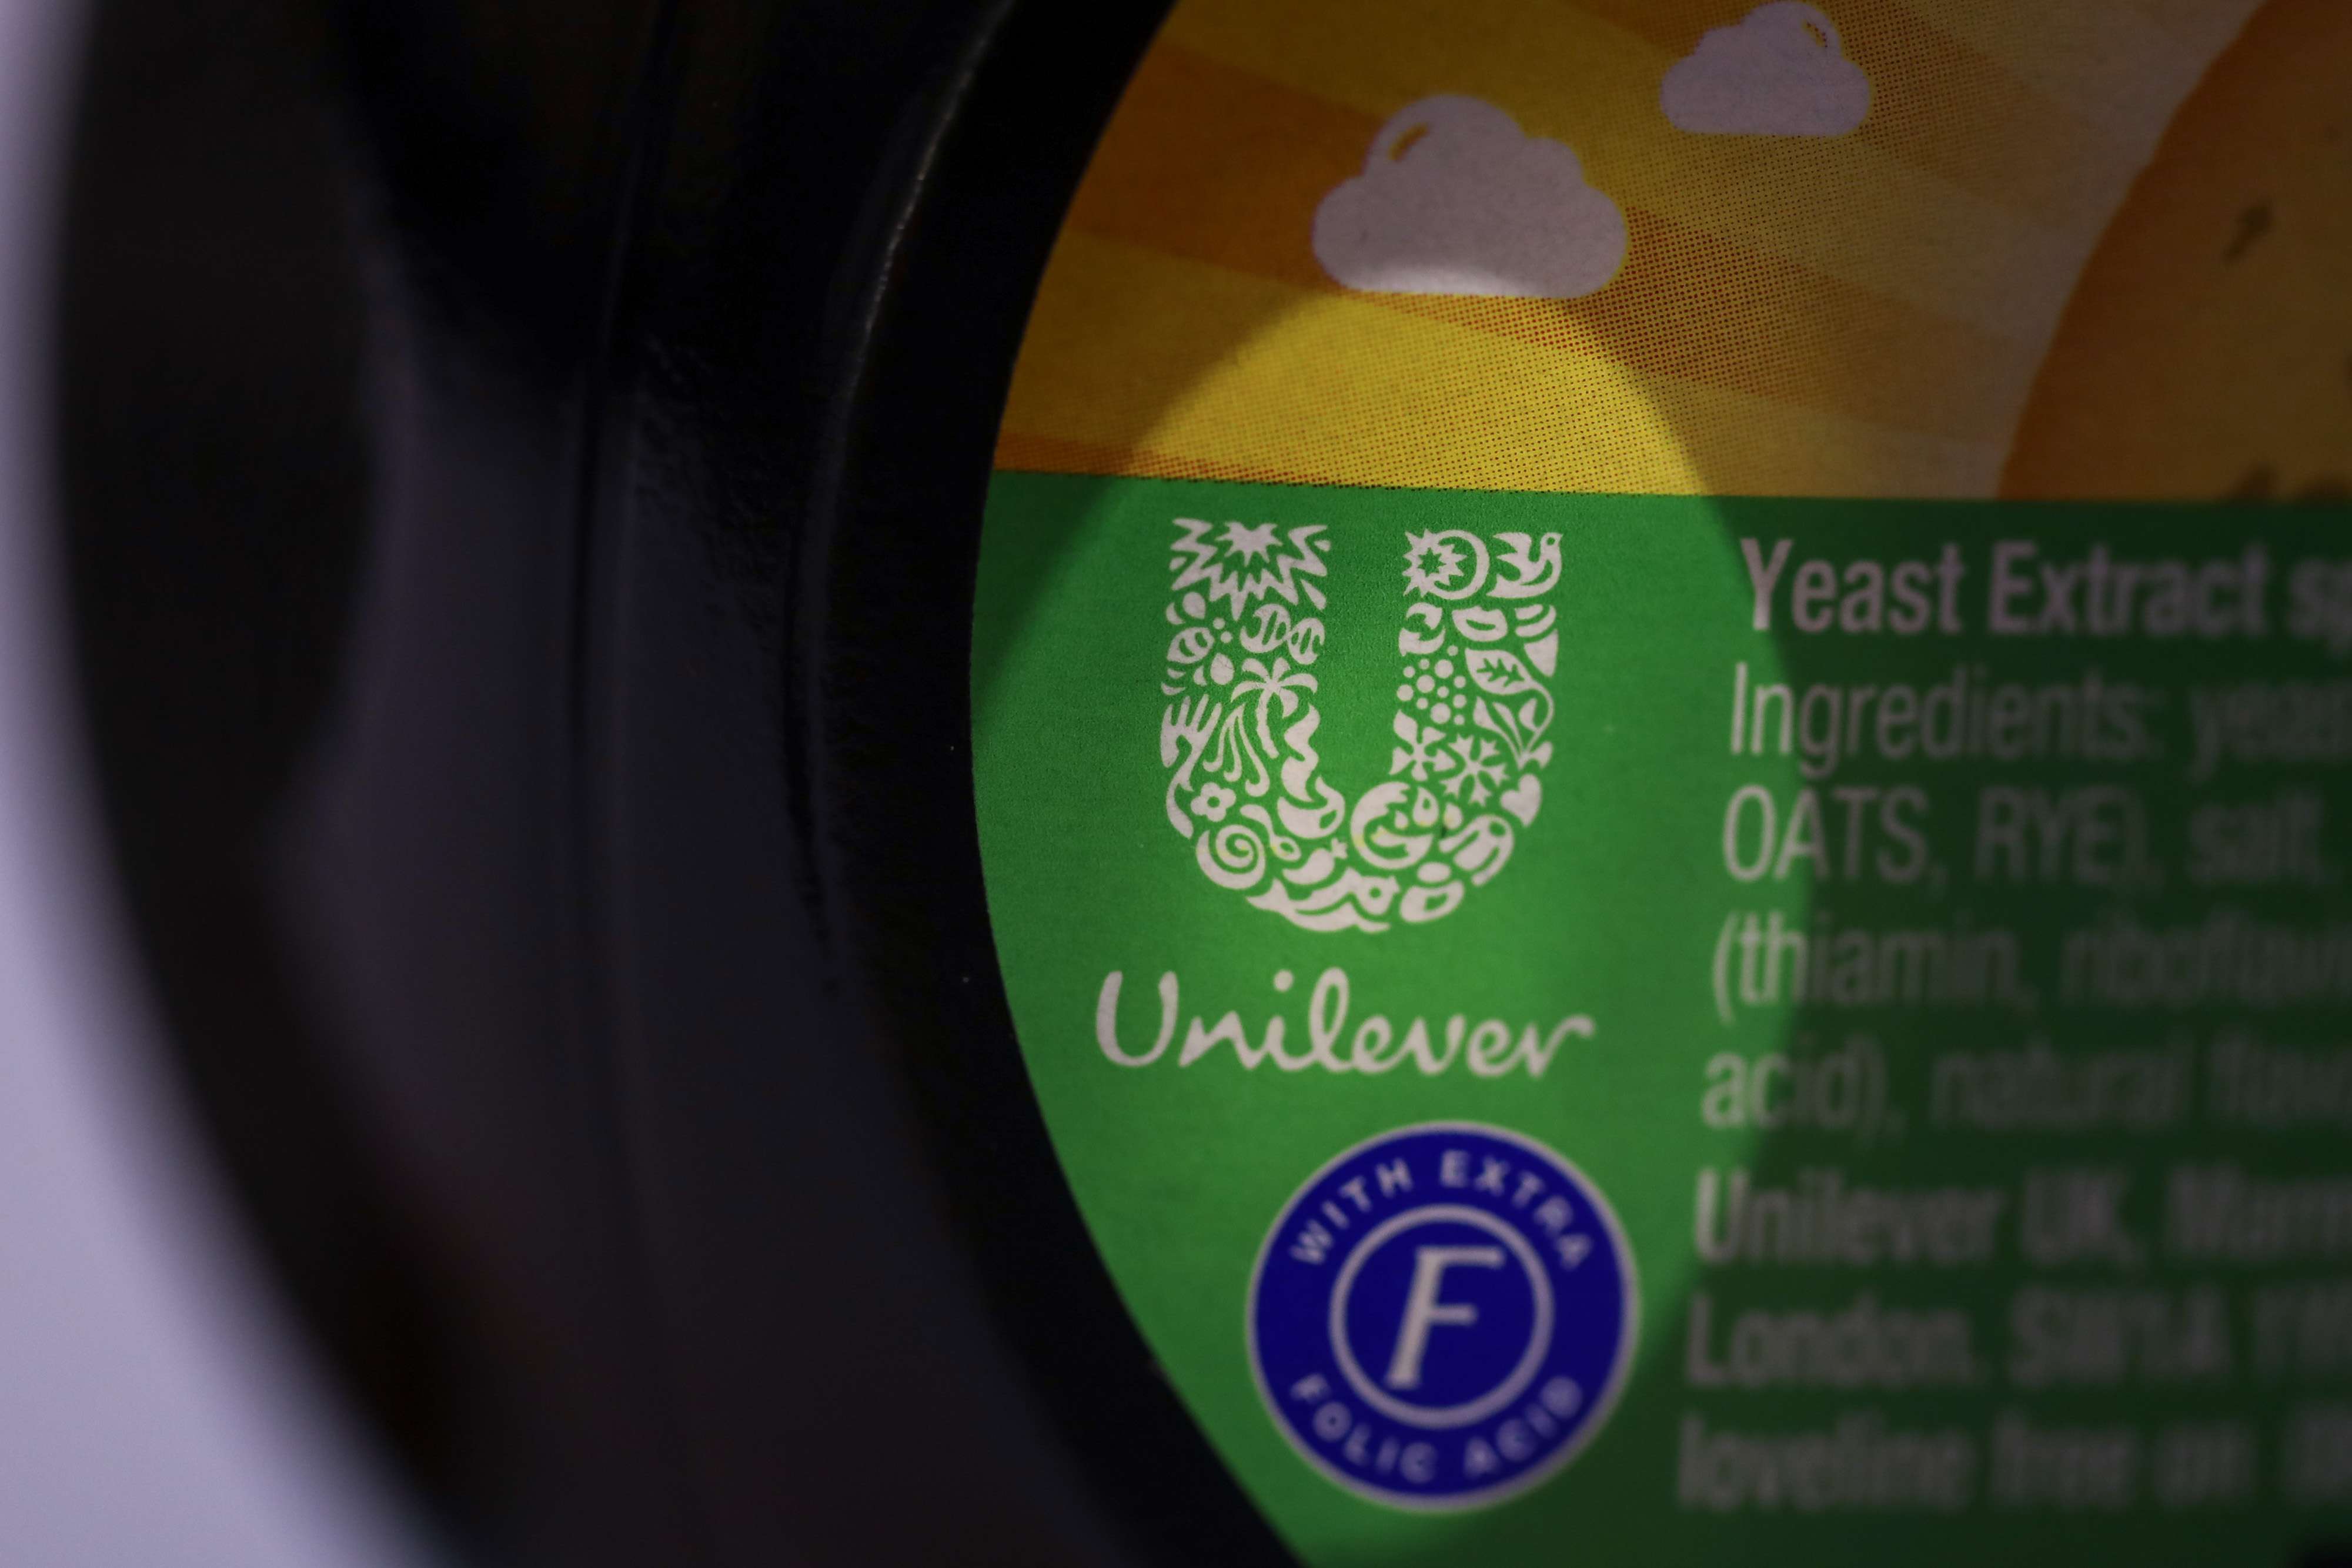 Collaboration with key stakeholders and the implementation of sustainable development goals are becoming increasingly central to the business planning process, and Unilever, the Netherlands-based consumer goods giant, is seen as a pioneer. Photo: Bloomberg